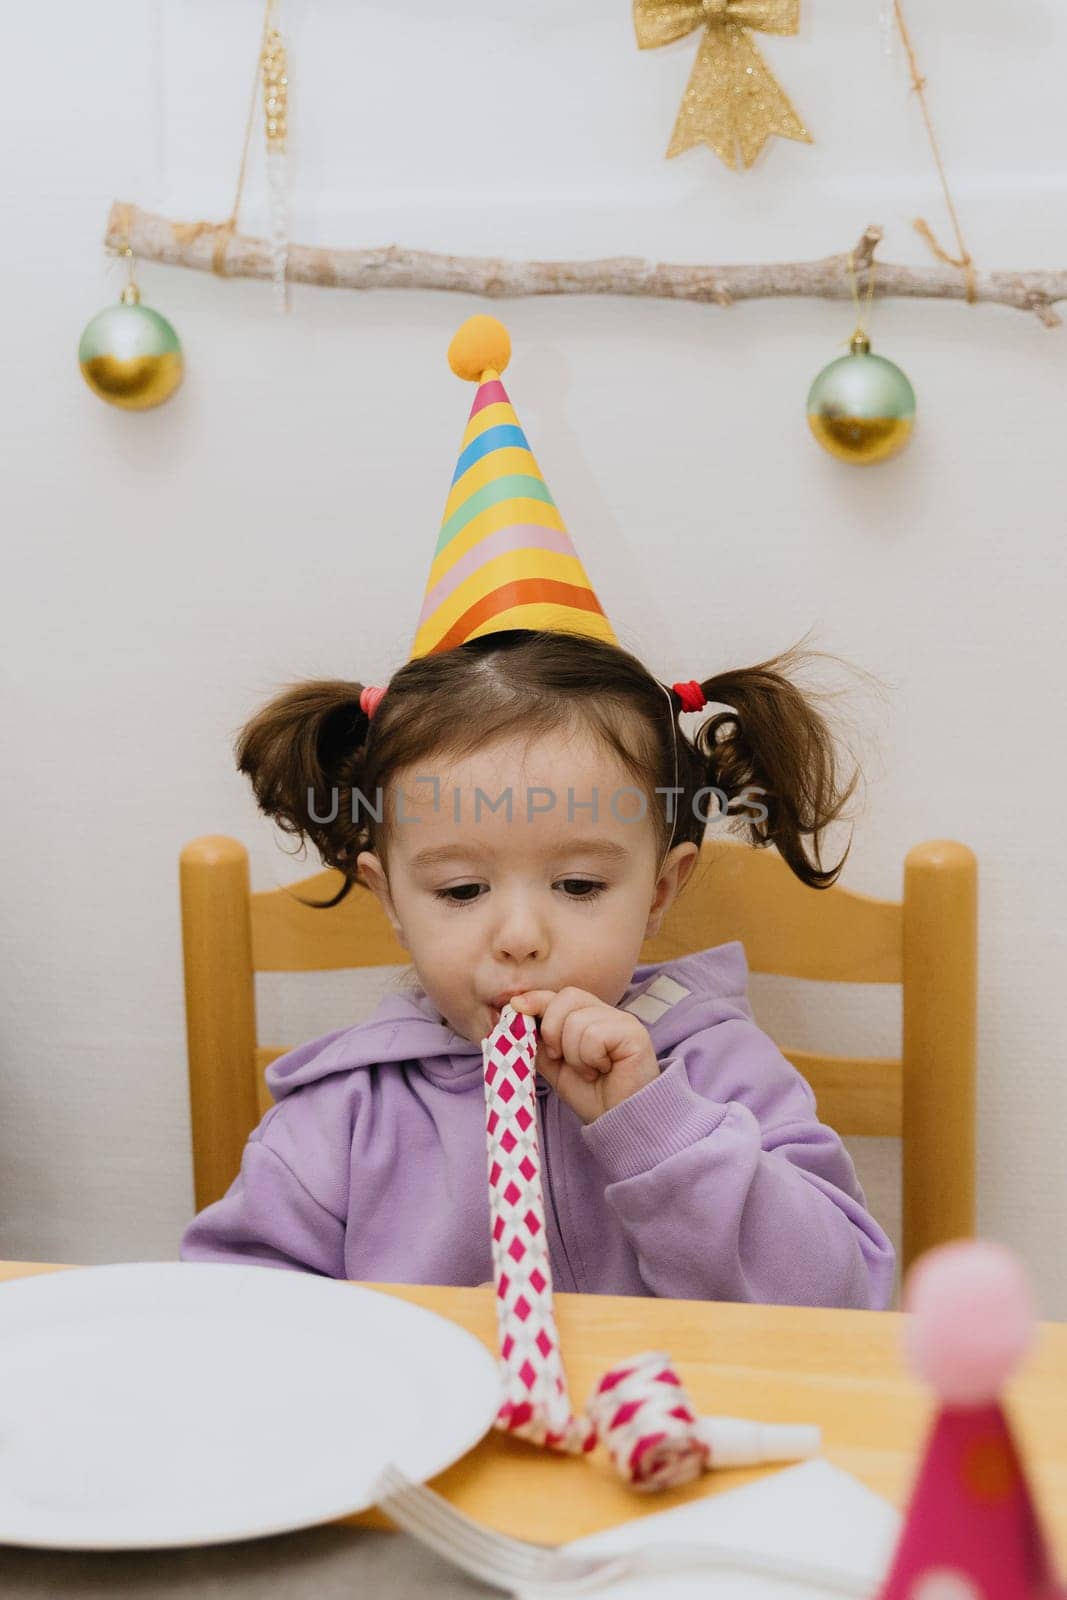 One beautiful Caucasian girl with a cone hat on her head sits at a festive table and blows a whistle into a paper pipe while celebrating her birthday, close-up side view.